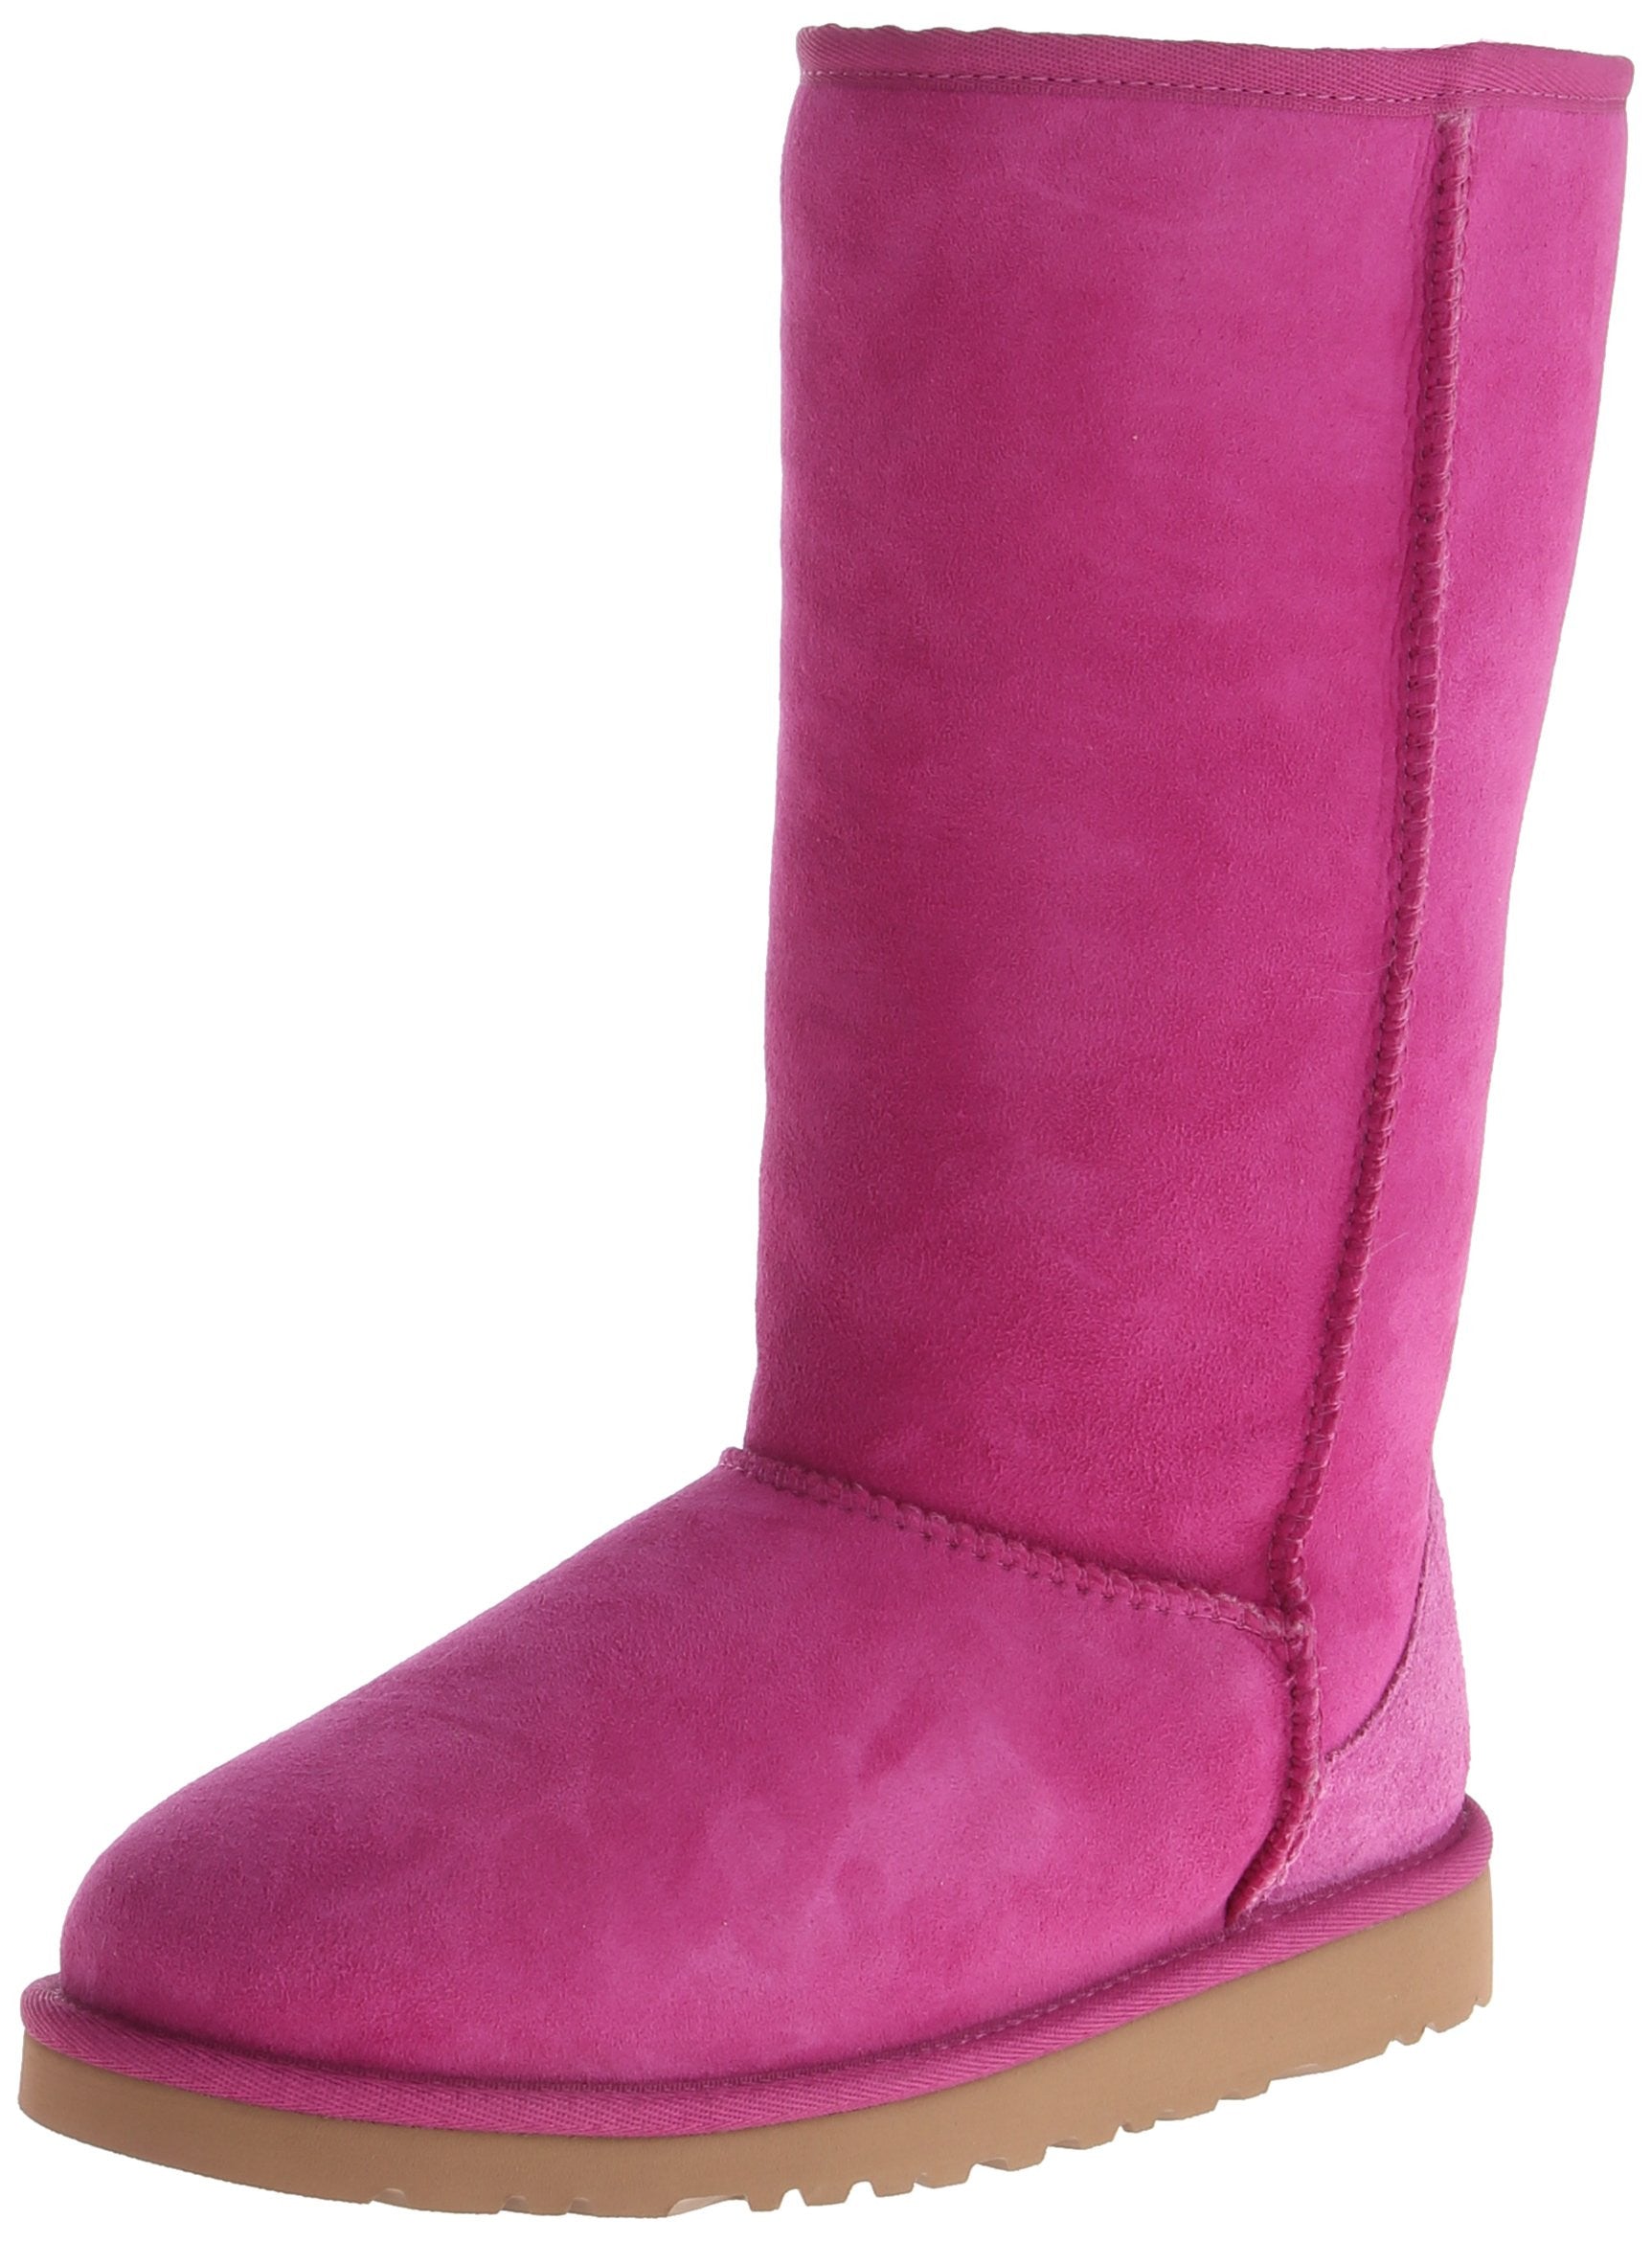 Ugg Boots Colours | Division of Global Affairs